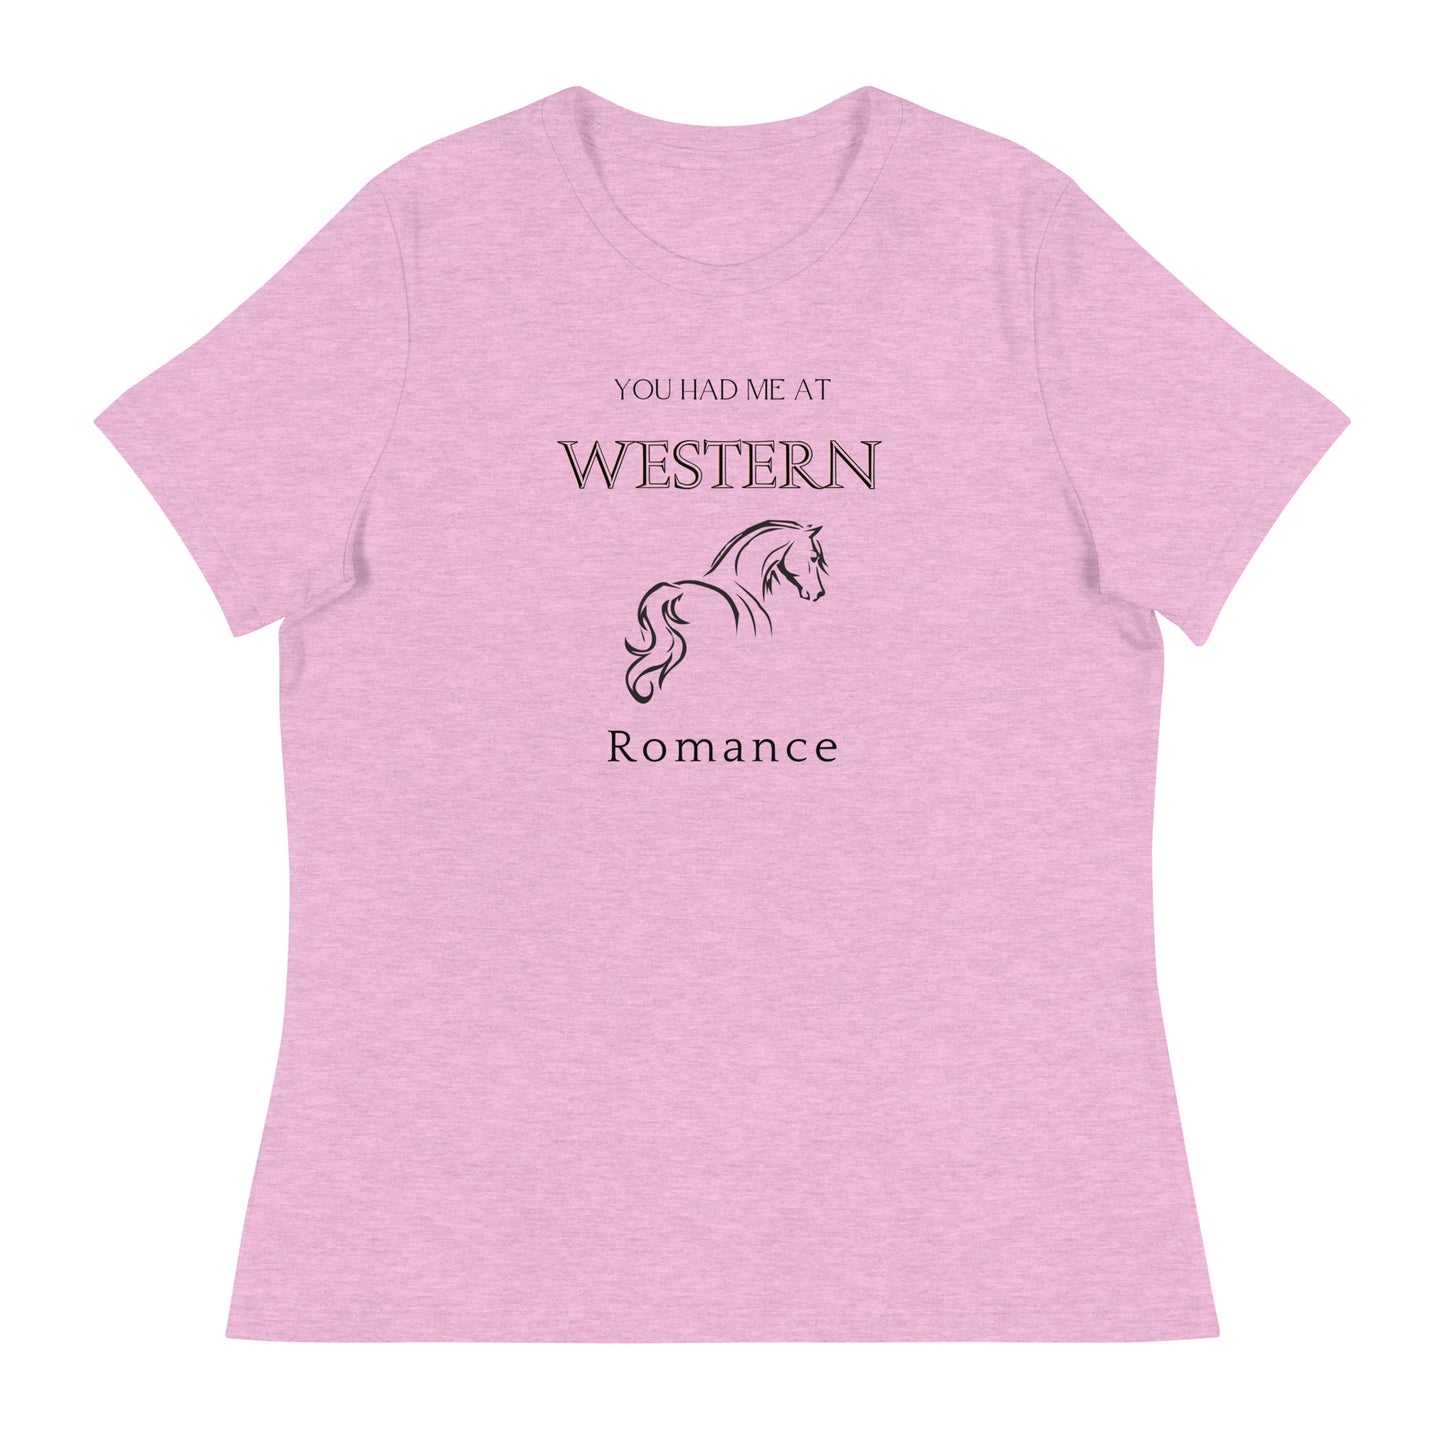 Women's Relaxed T-Shirt You had me at Western Romance